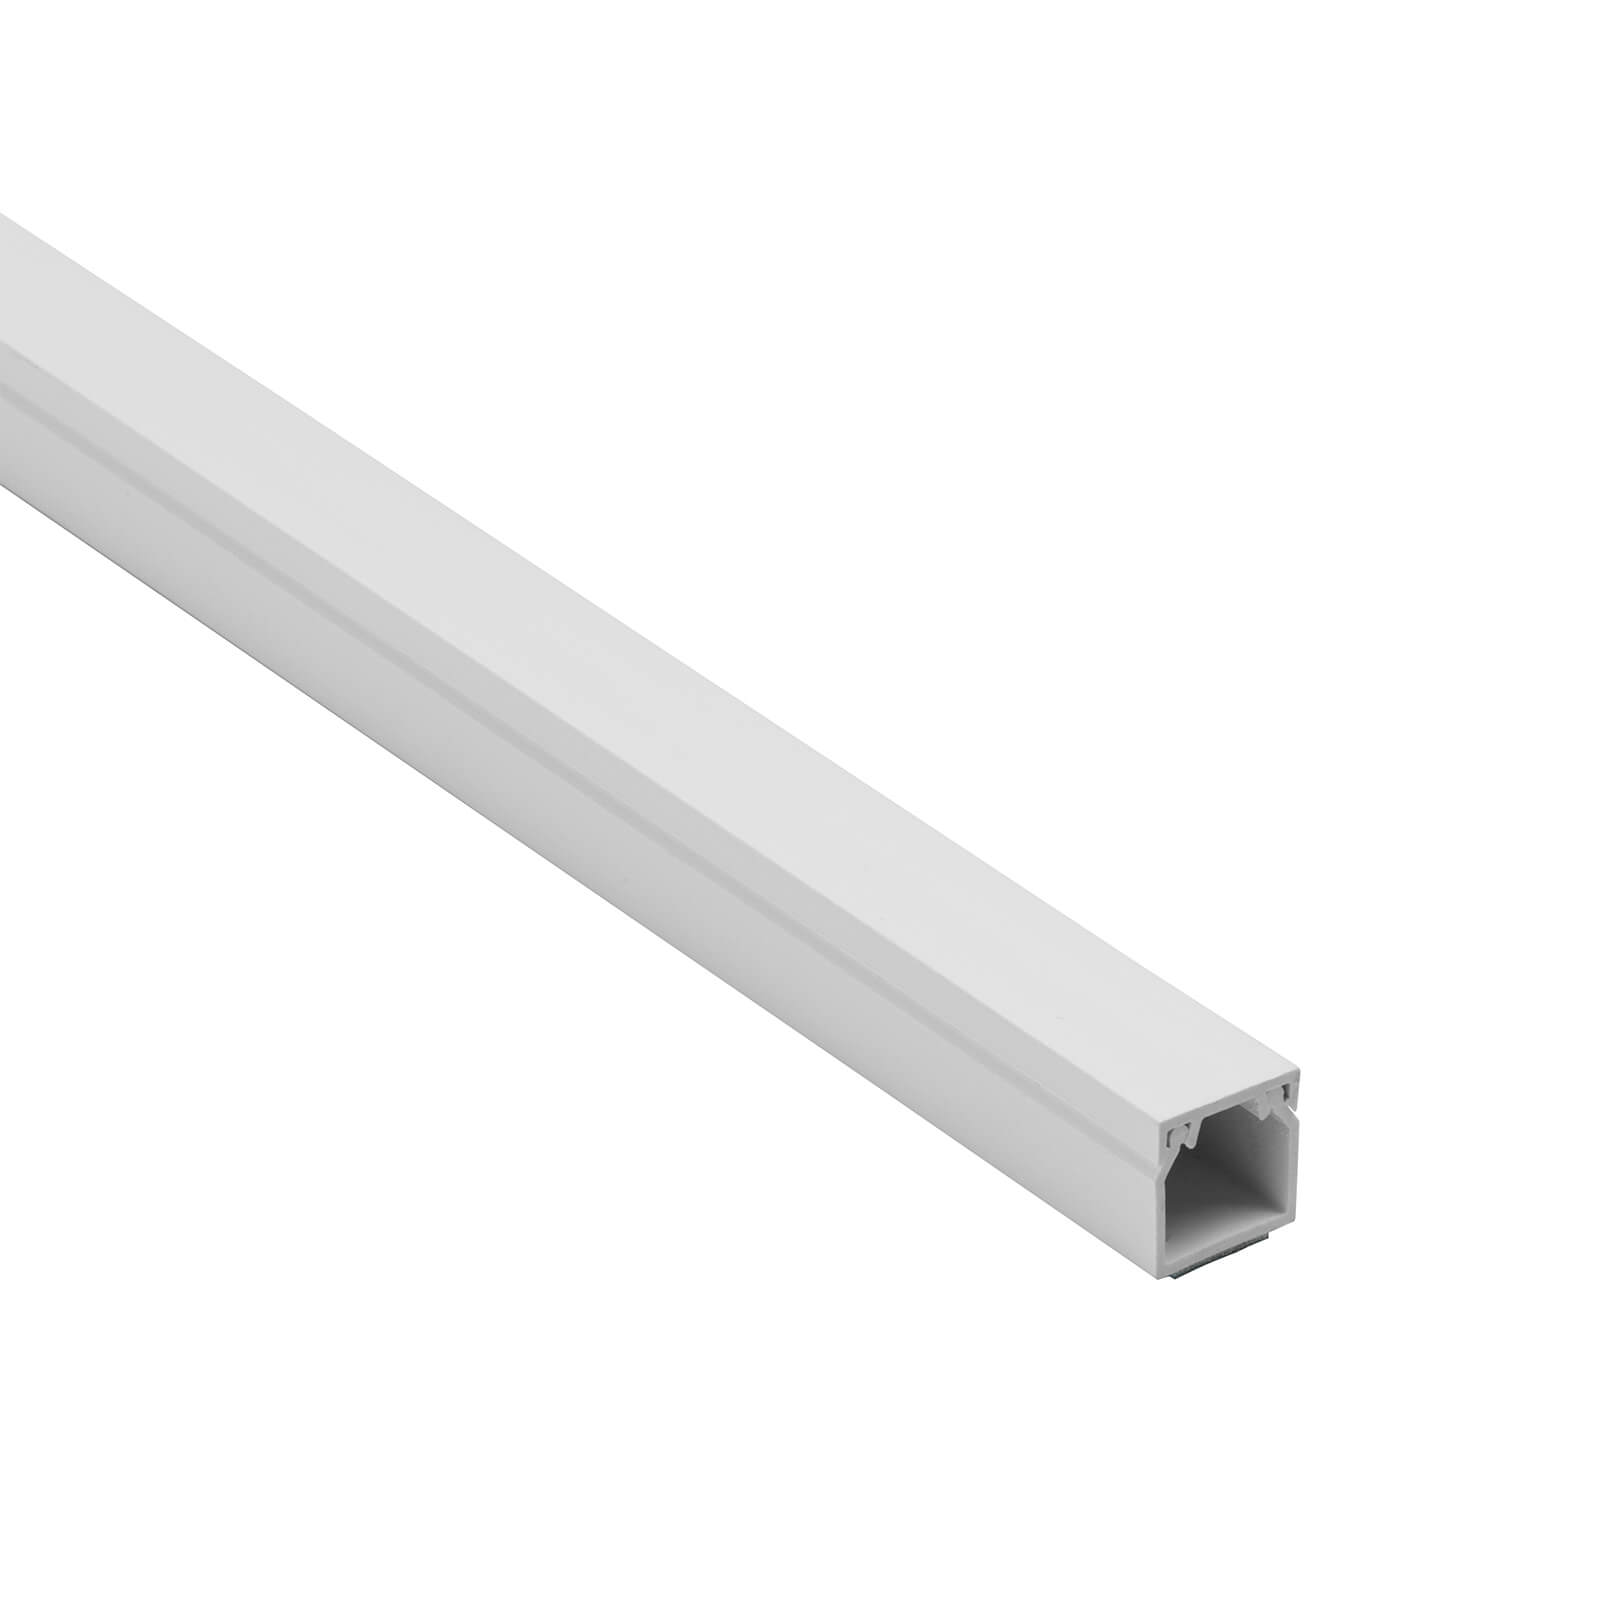 Photo of D-line Trunking - 16mm X 16mm X 2m Length - White